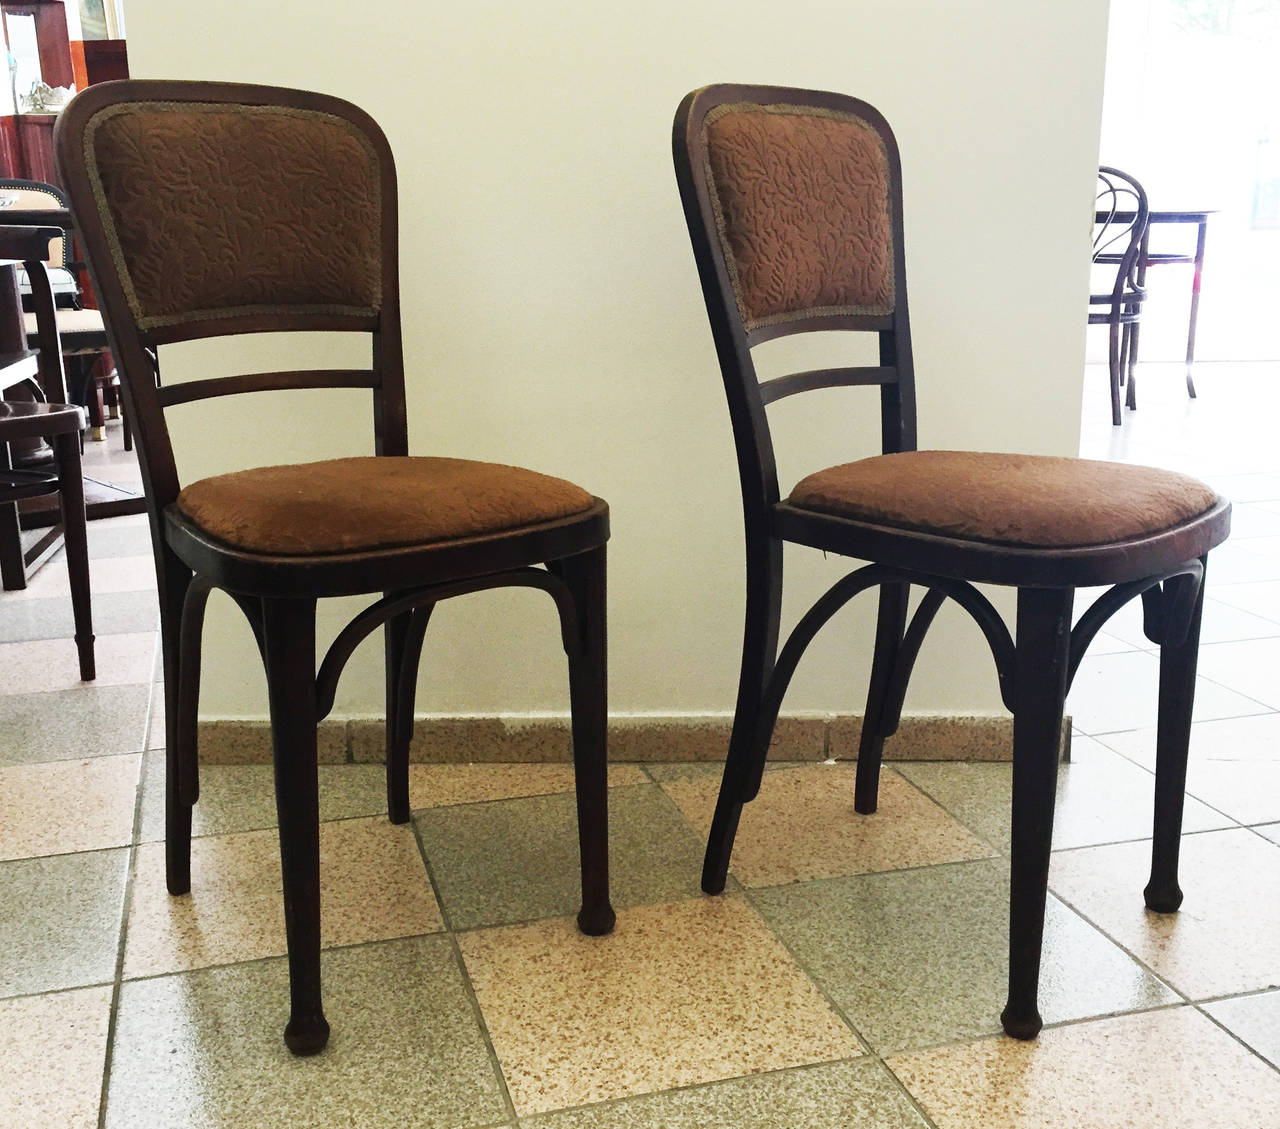 Pair of Rare Thonet 492 Chairs attributed to Gustav Siegel In Fair Condition For Sale In Vienna, AT